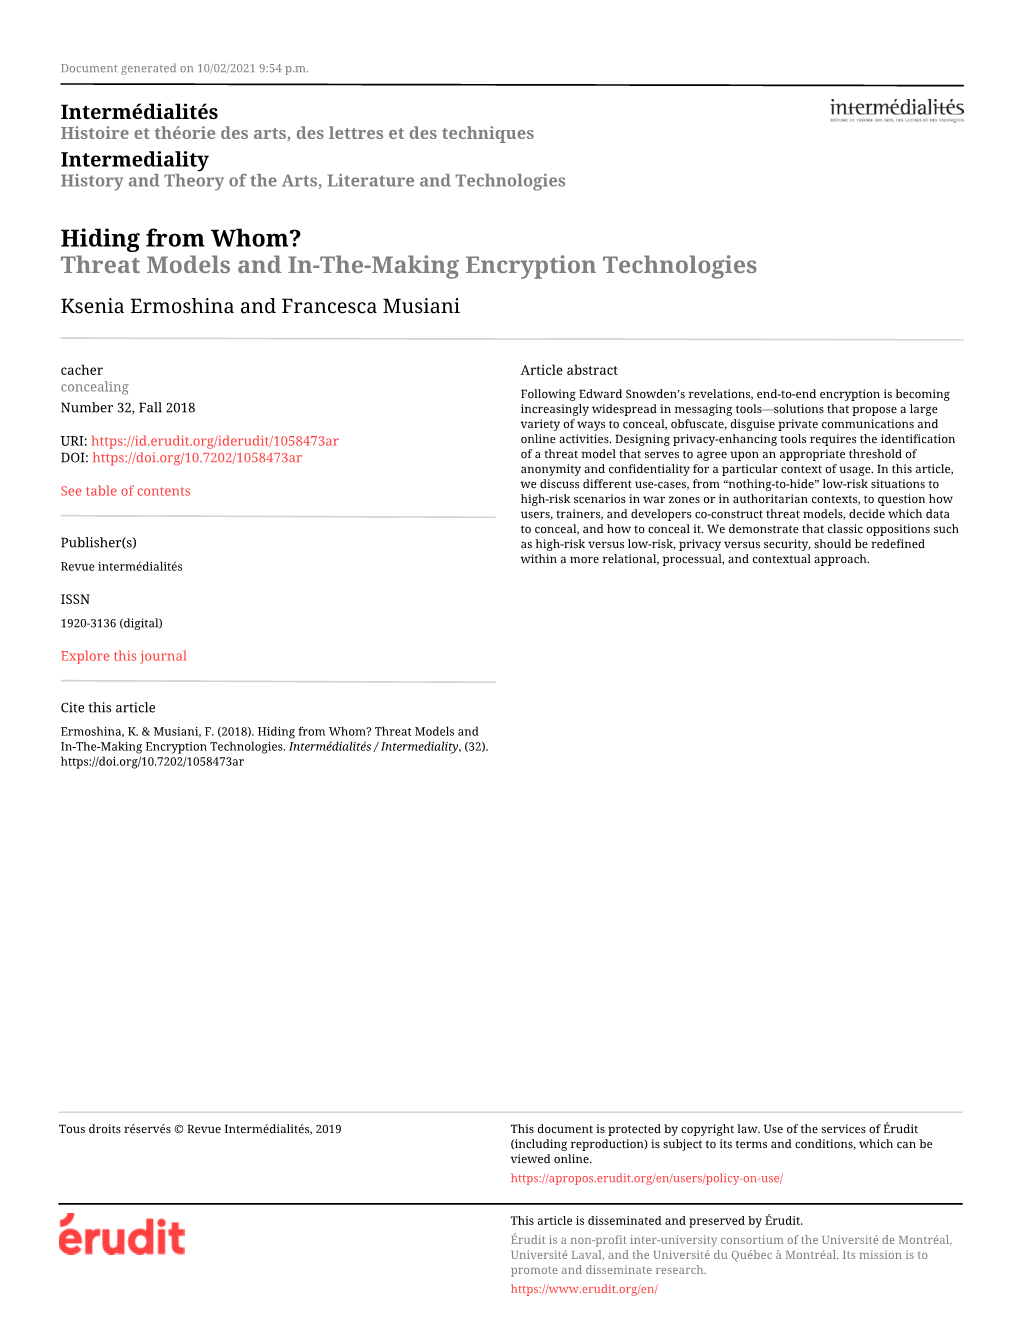 Threat Models and In-The-Making Encryption Technologies Ksenia Ermoshina and Francesca Musiani